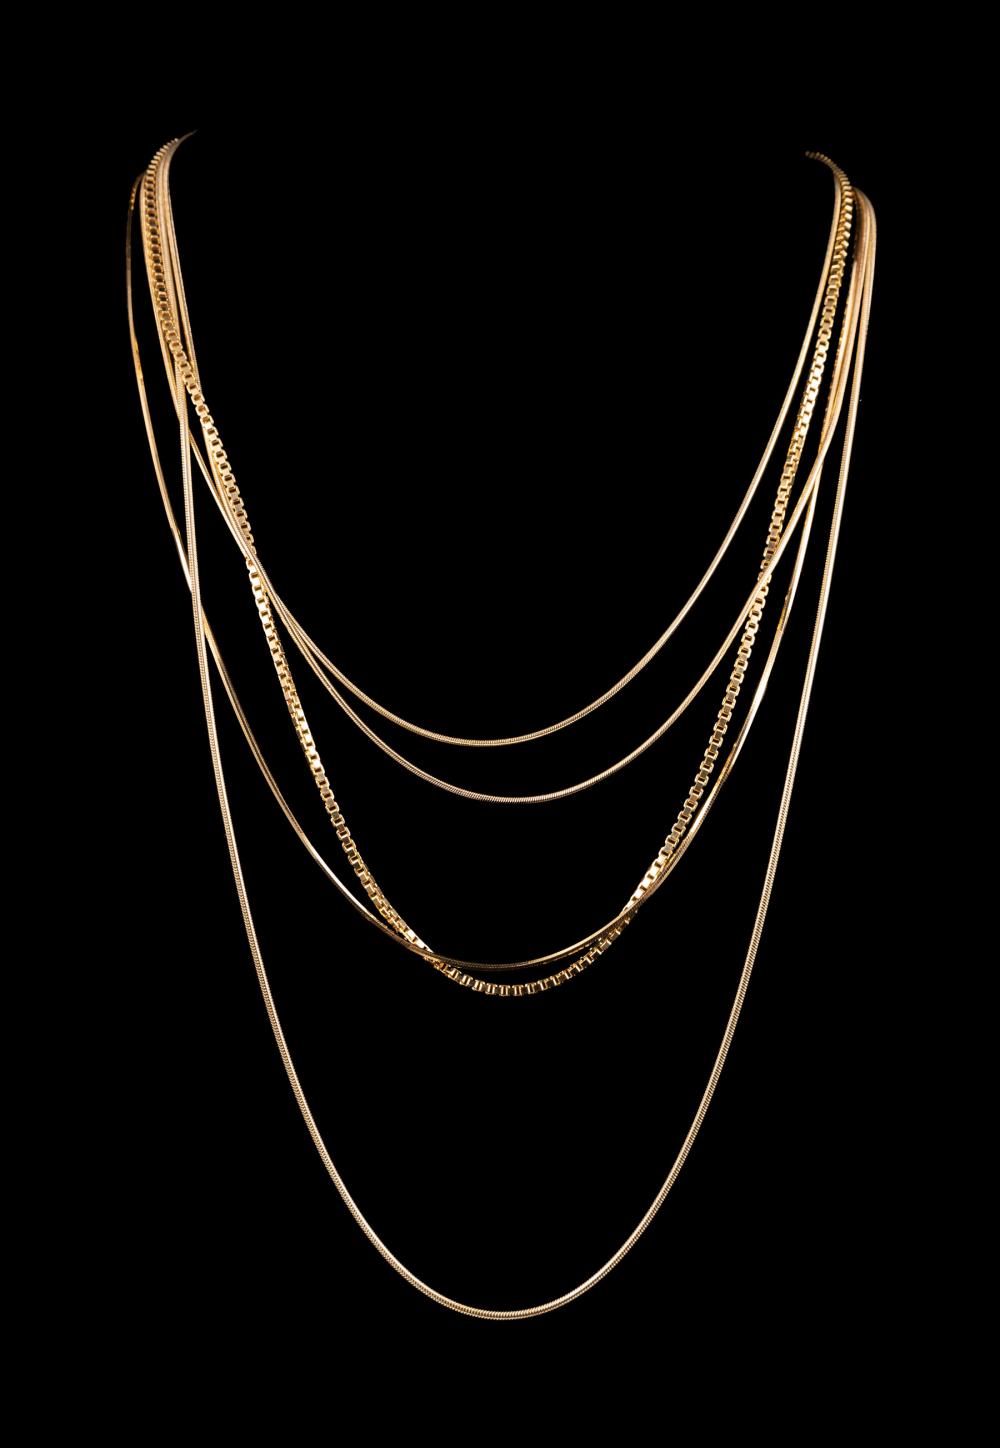 GROUP OF FIVE 14 KT. YELLOW GOLD